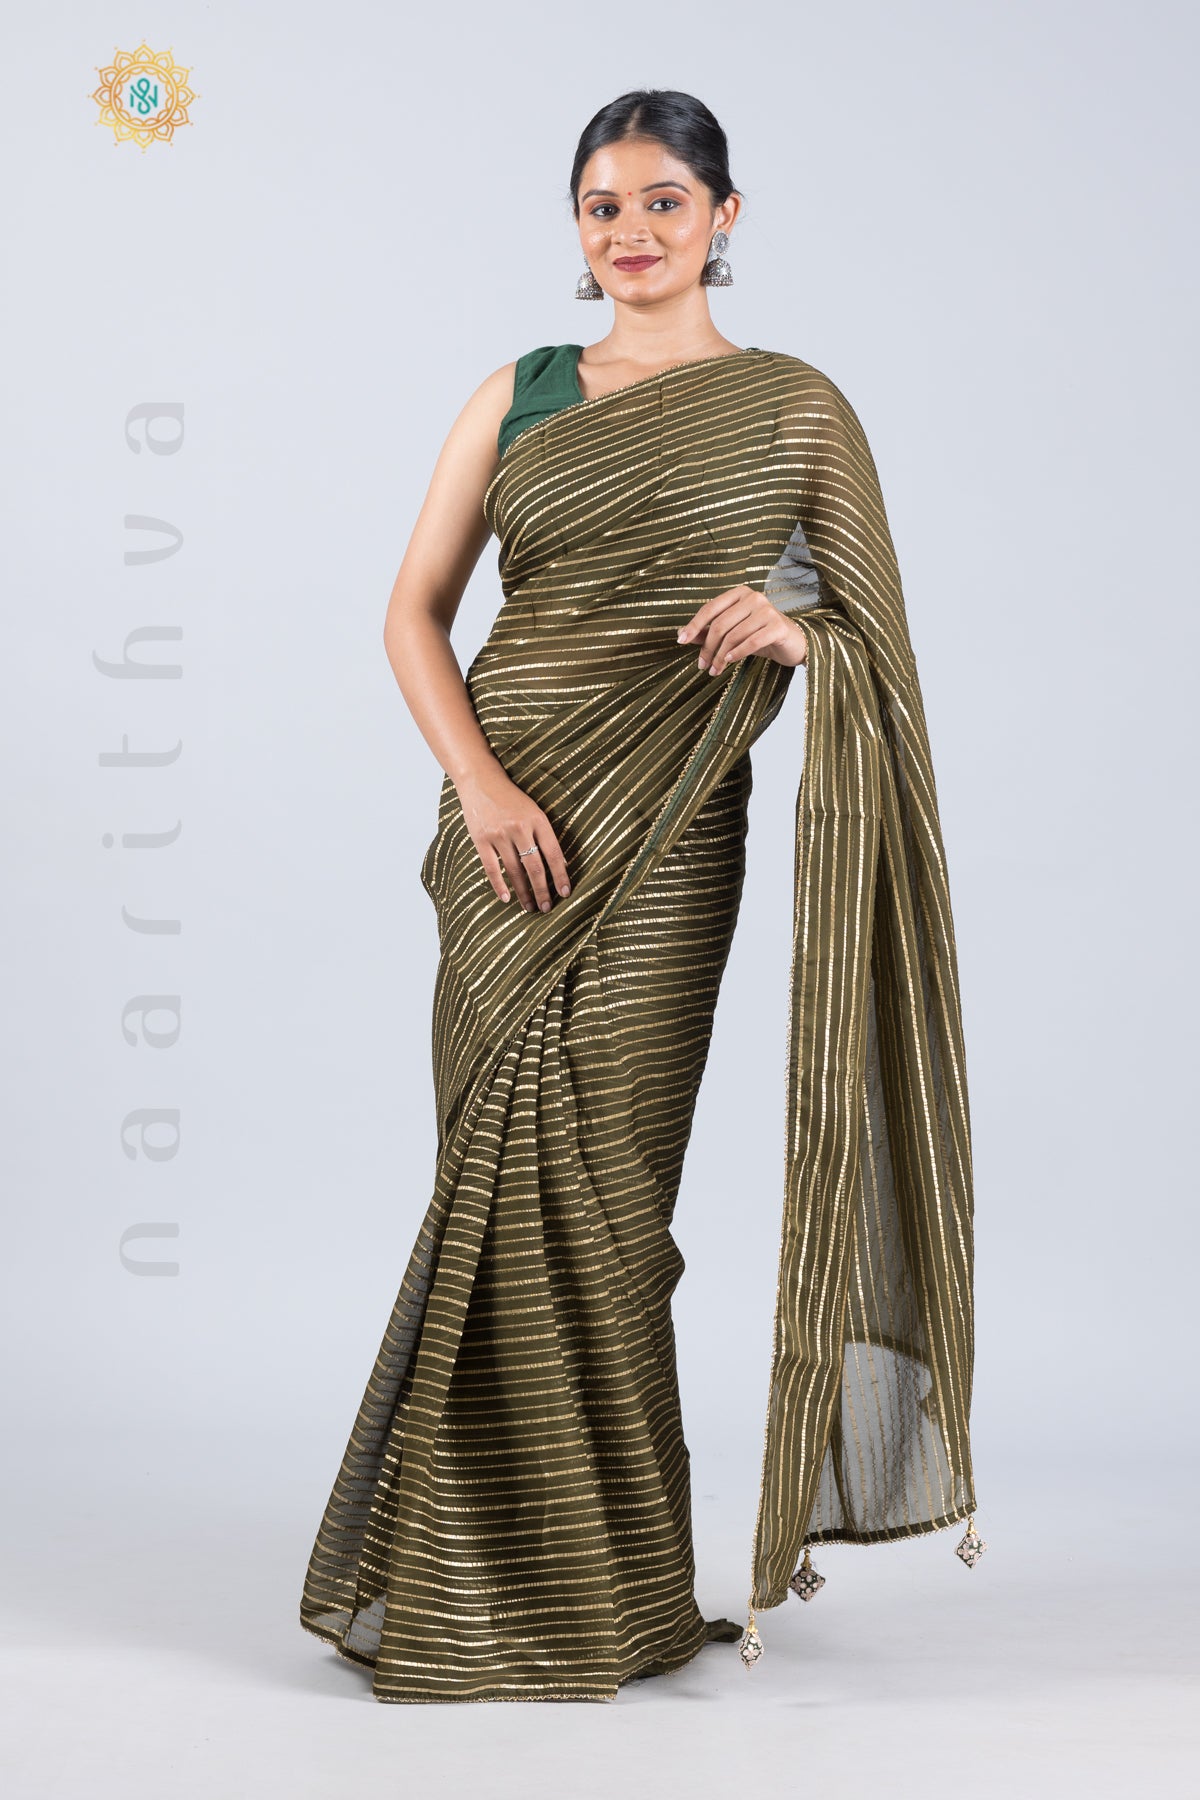 OLIVE GREEN - ORGANZA GEORGETTE WITH ZARI STRIPES, PIPE BEADS BORDER & BROCADE BLOUSE